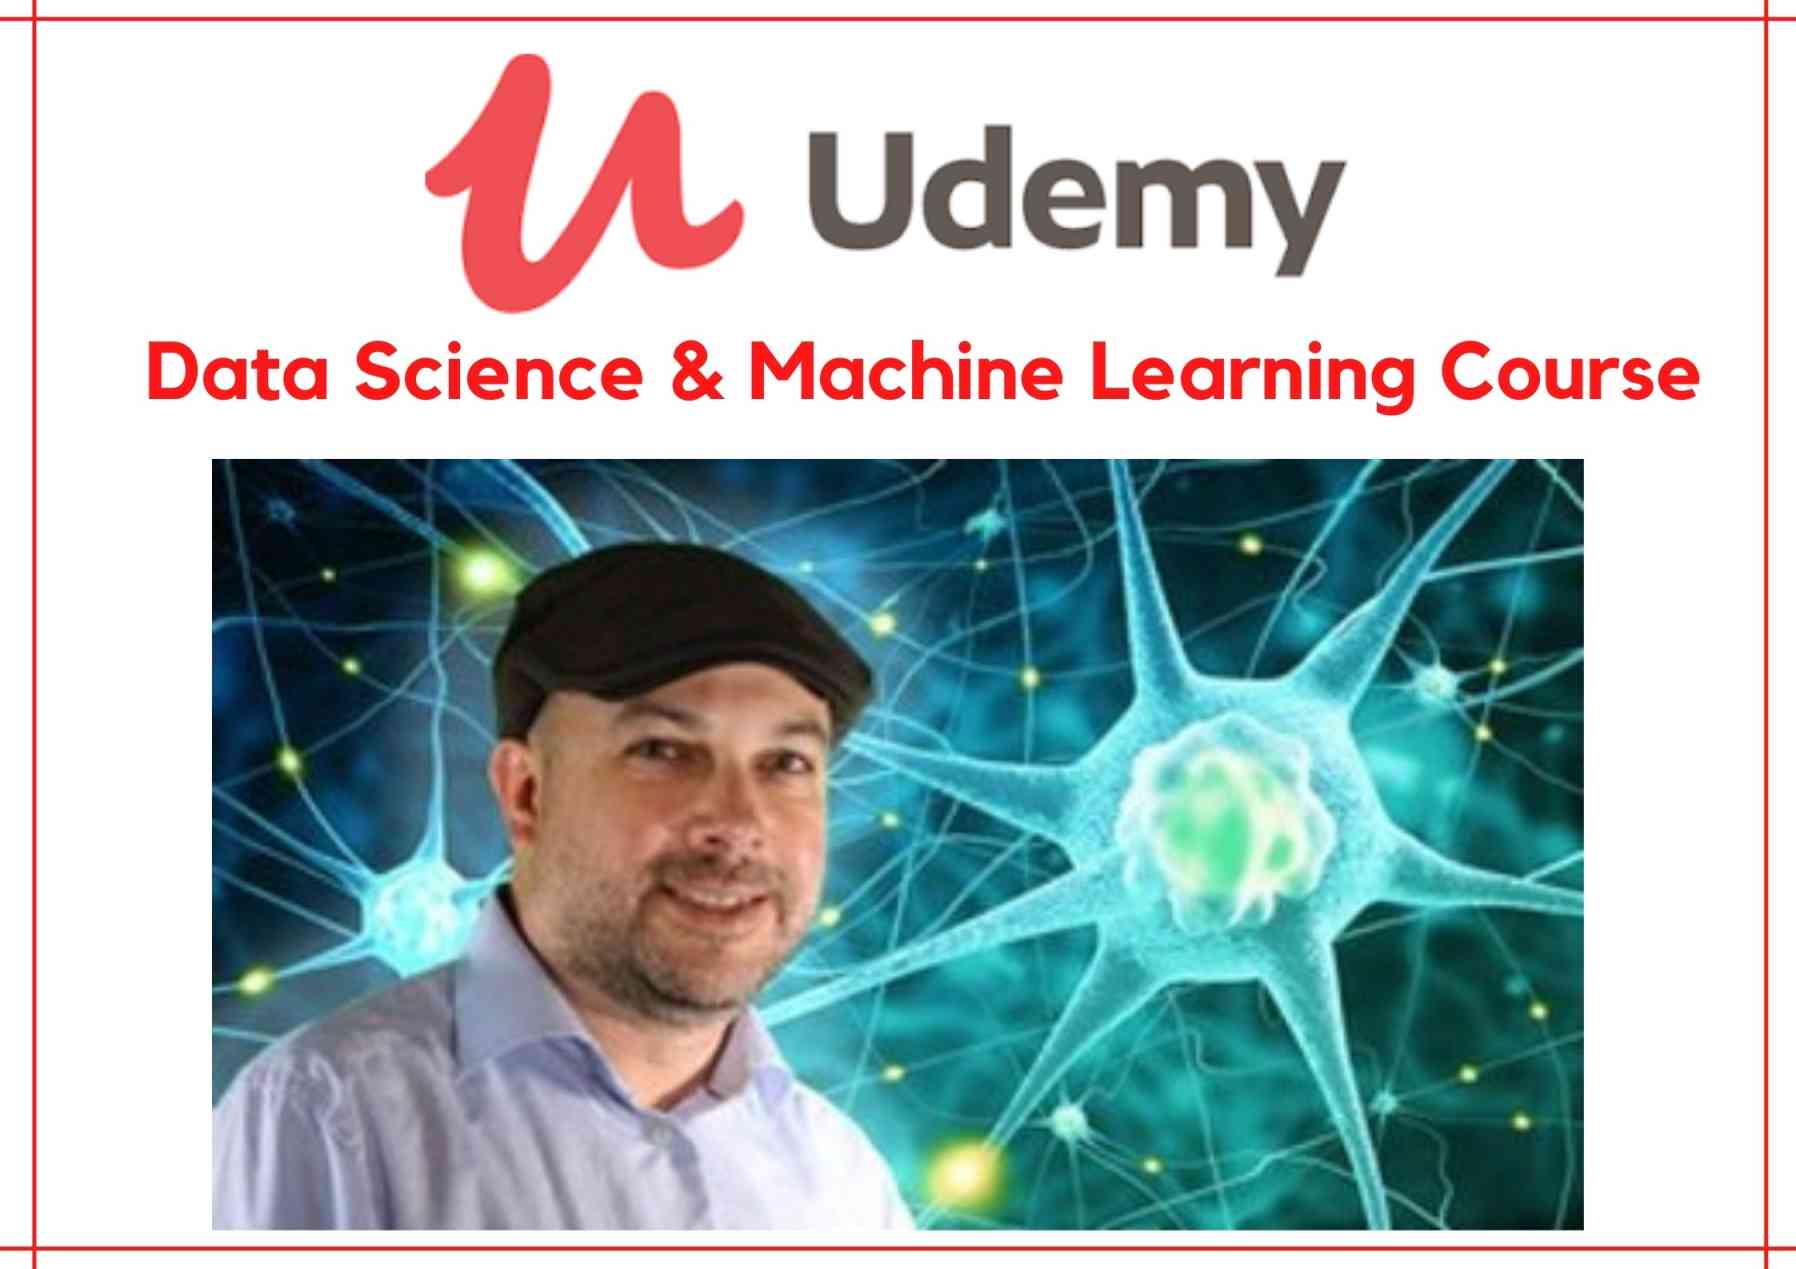 Get Udemy Data Science and Machine learning Course Discount